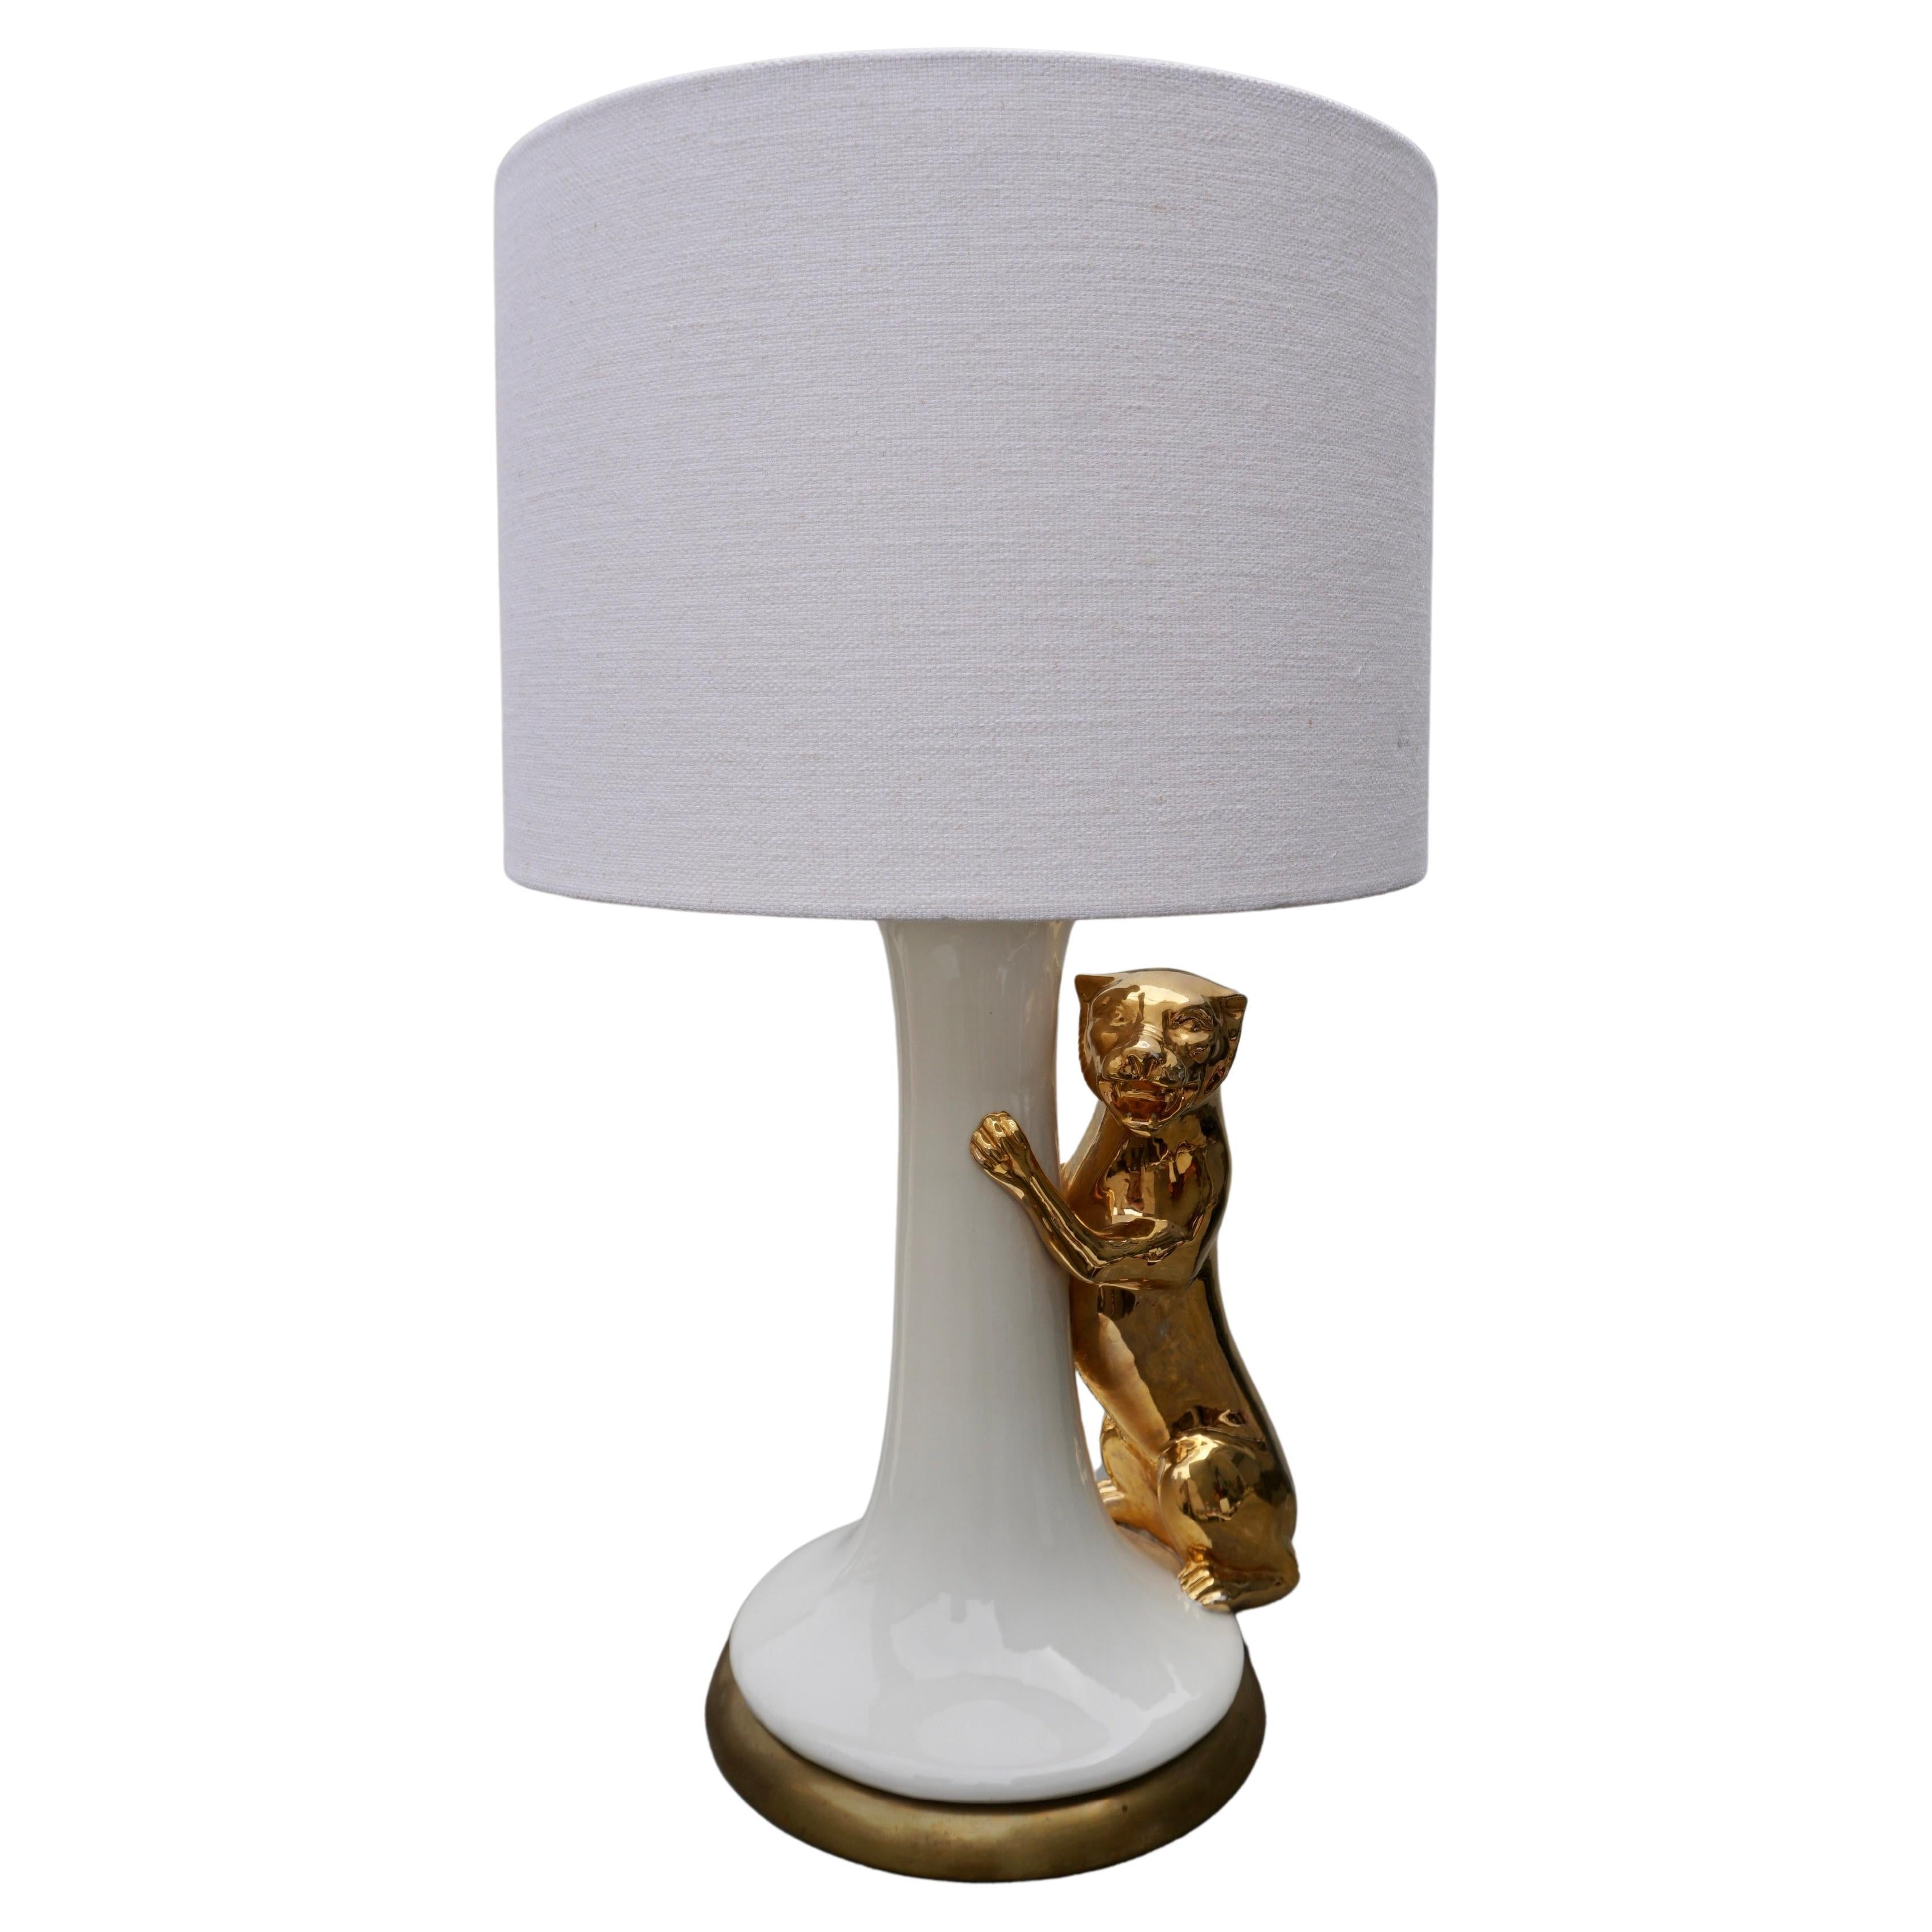 Italian Midcentury Table Lamp with Ceramic Gilt Panther, 1970s